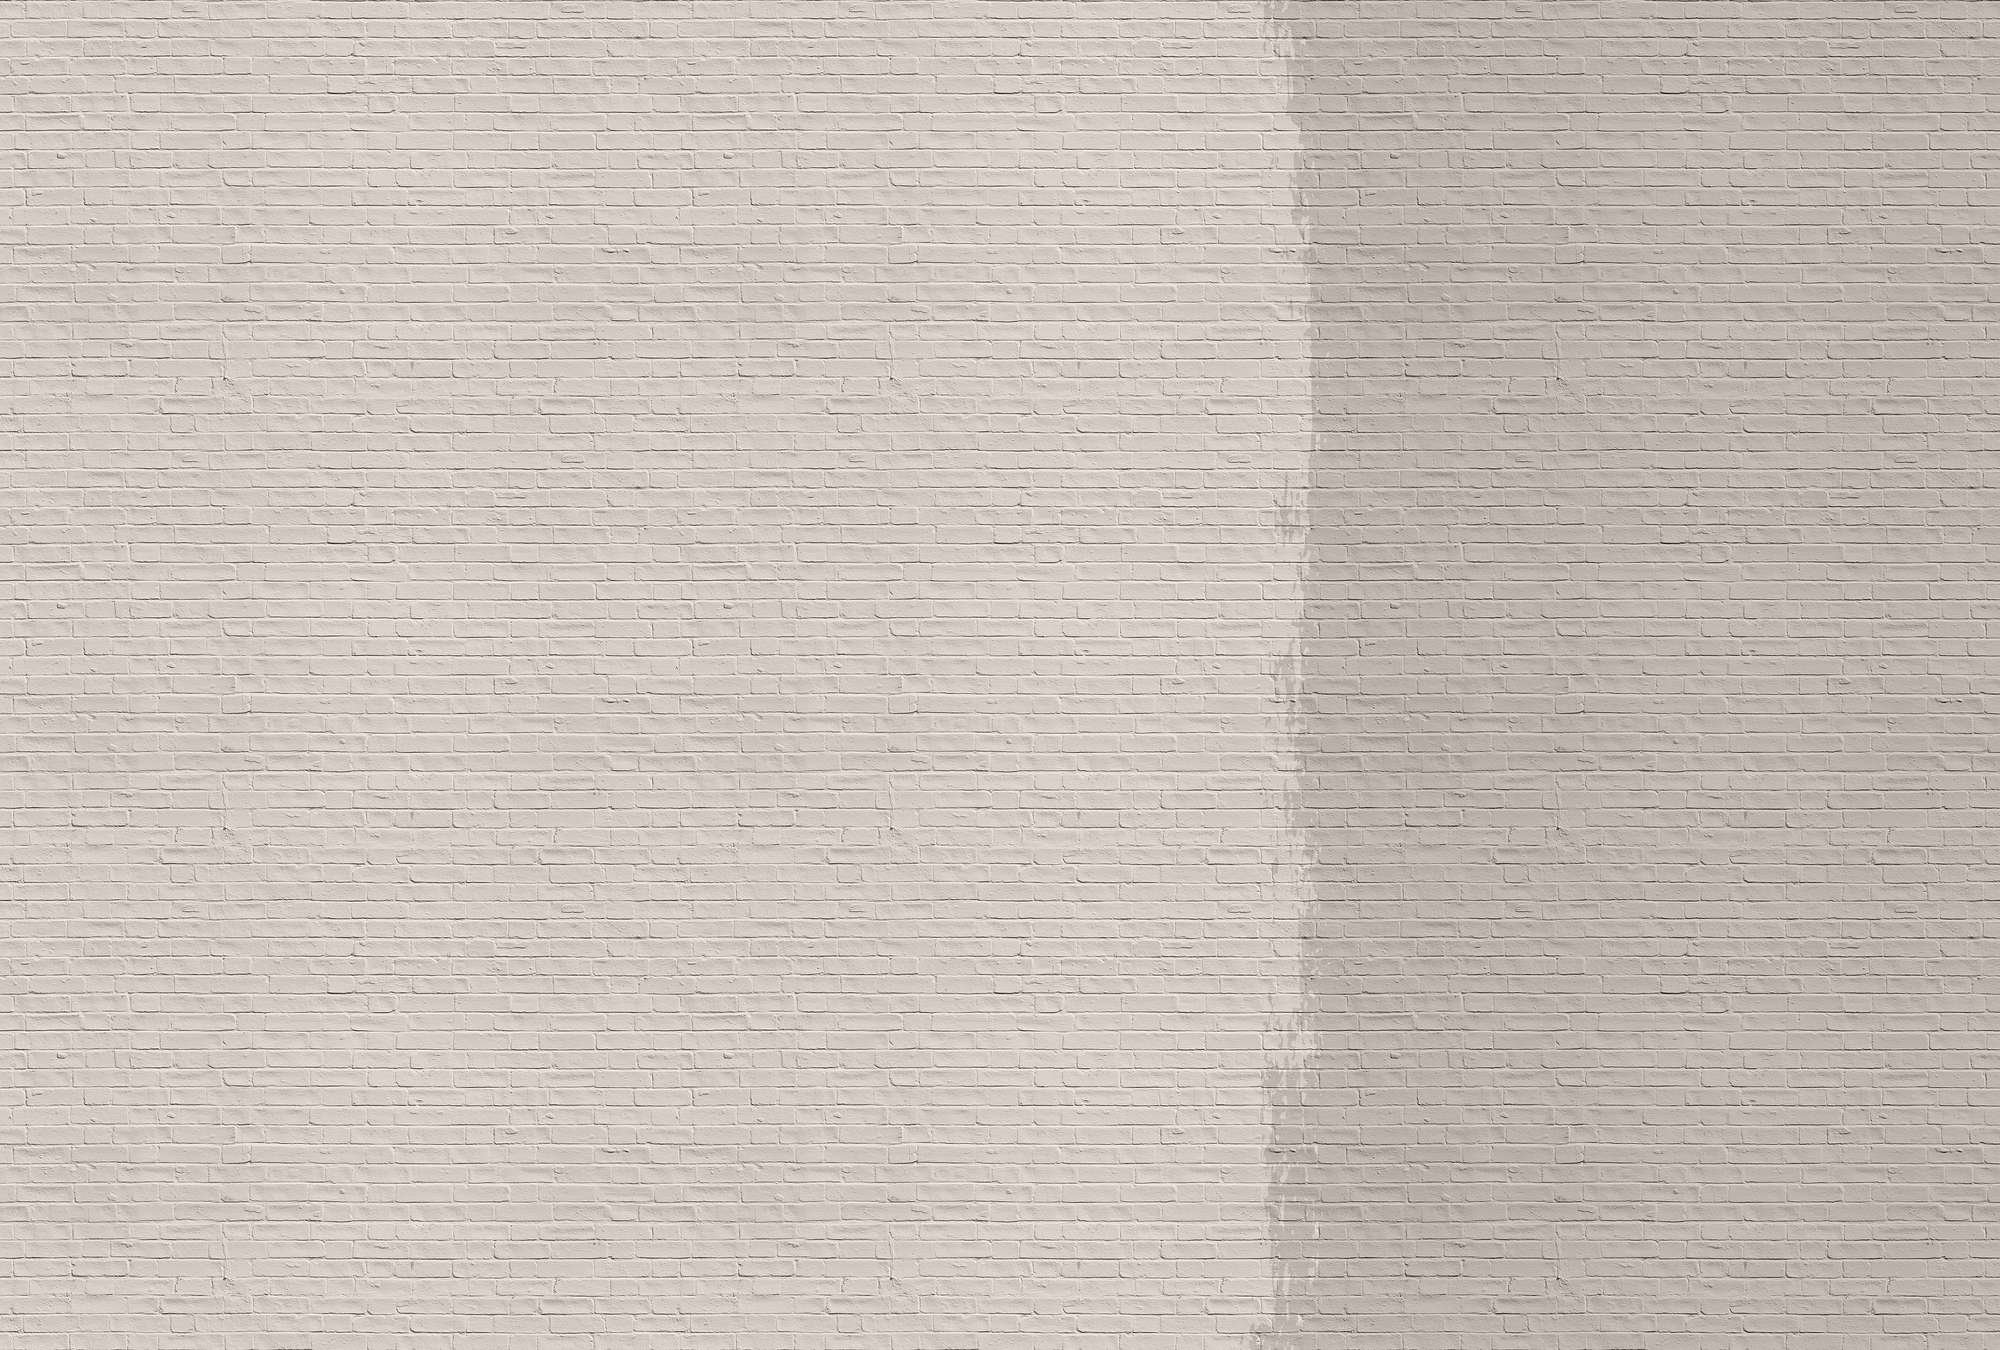             Tainted love 1 - Brick wall mural painted - Beige, Taupe | Pearl smooth fleece
        